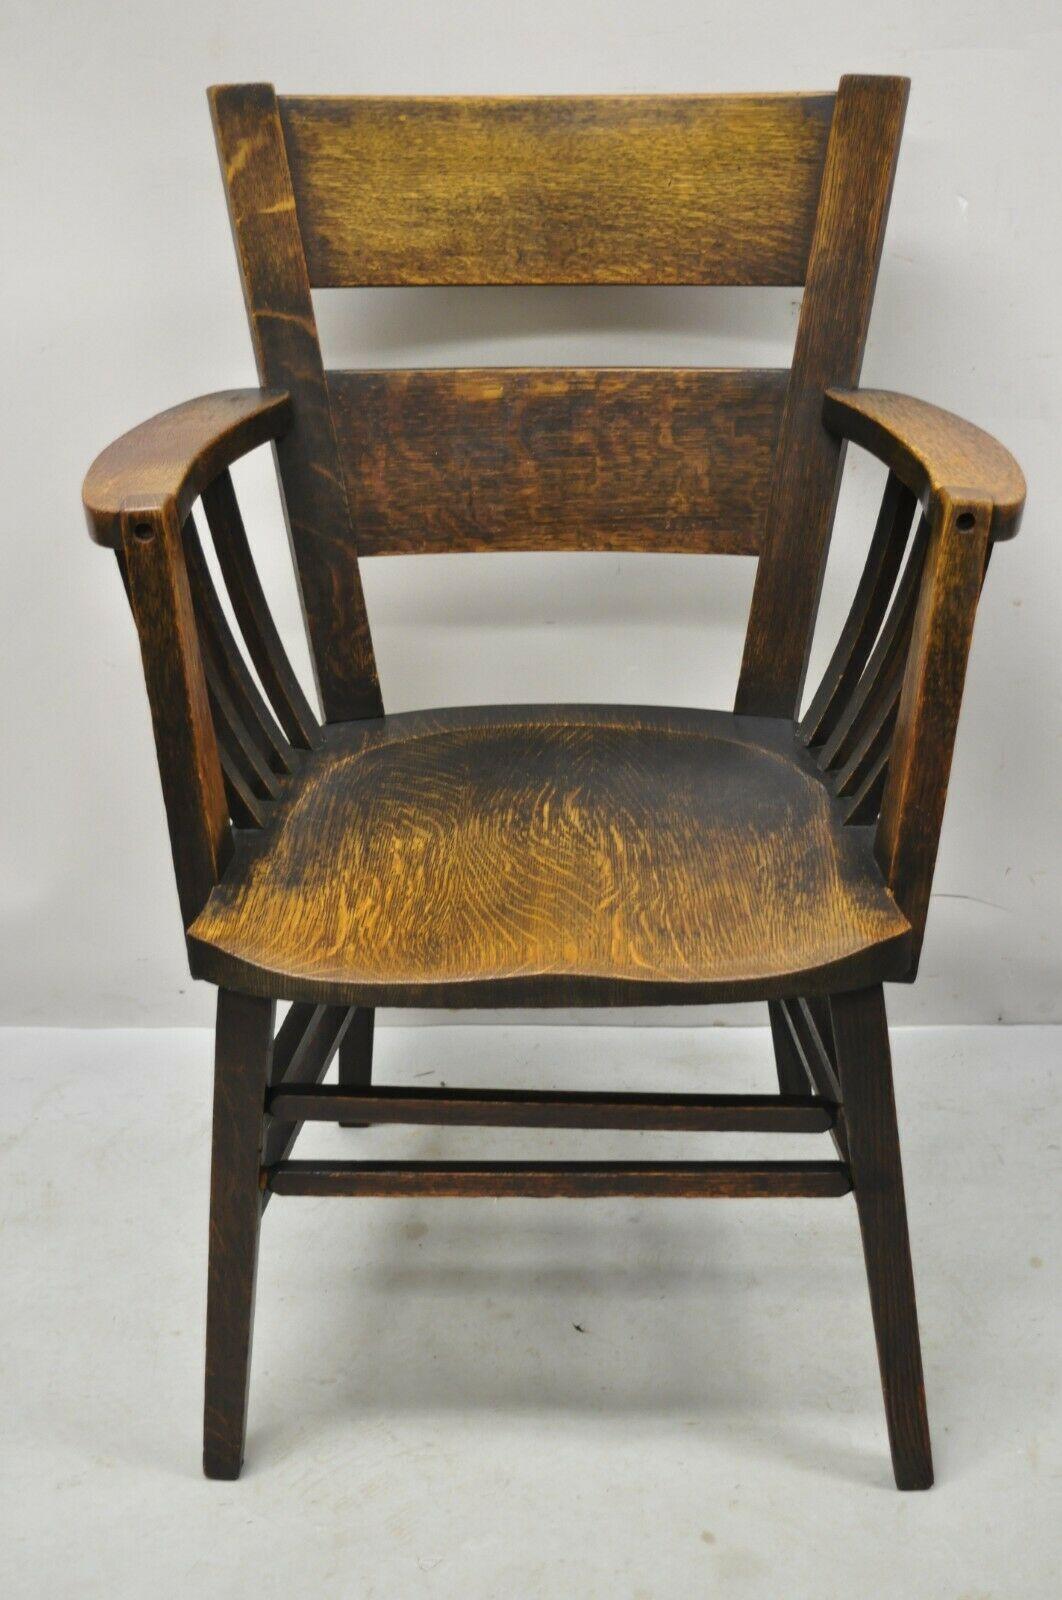 Antique Arts & Crafts mission oak bowed spindle plank seat arm chair. Item features bowed spindle slat sides, plank seat, solid wood construction, beautiful wood grain, very nice antique item. Circa early to mid 1900s. Measurements: 37